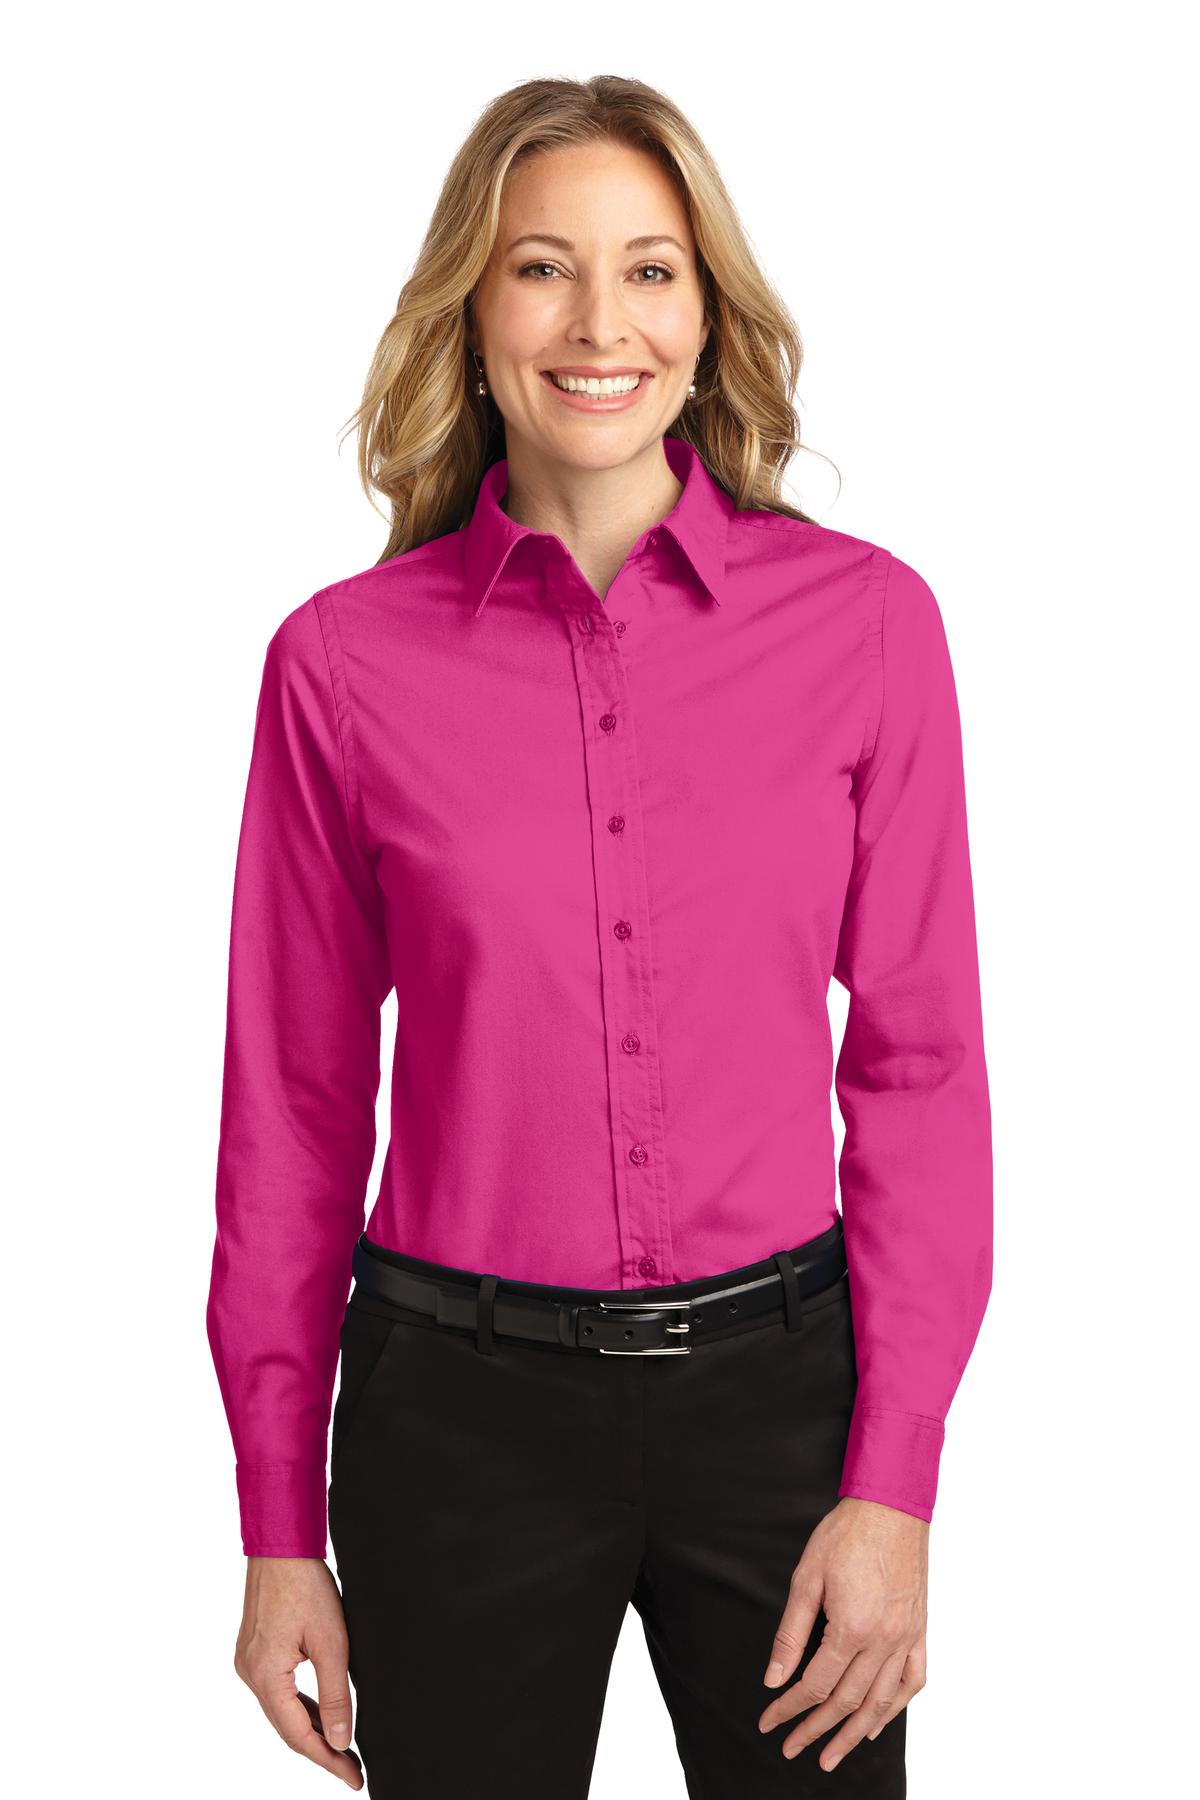 Port Authority Ladies Long Sleeve Easy Care Shirt-4XL (Tropical Pink) - image 1 of 6